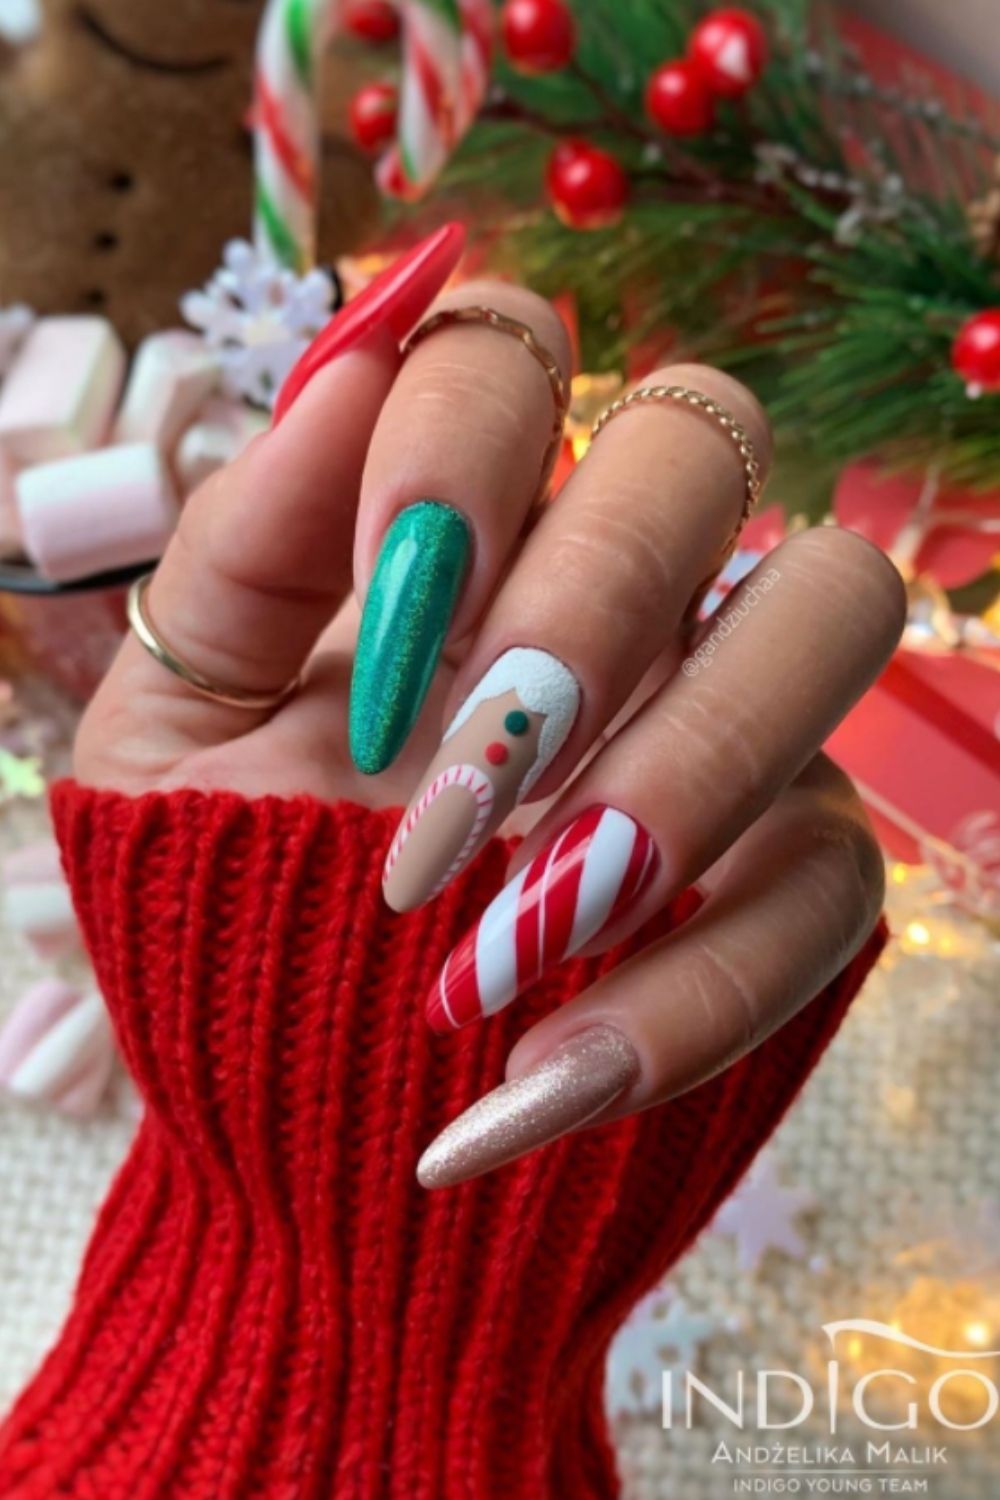 Candy canes and snowflakes